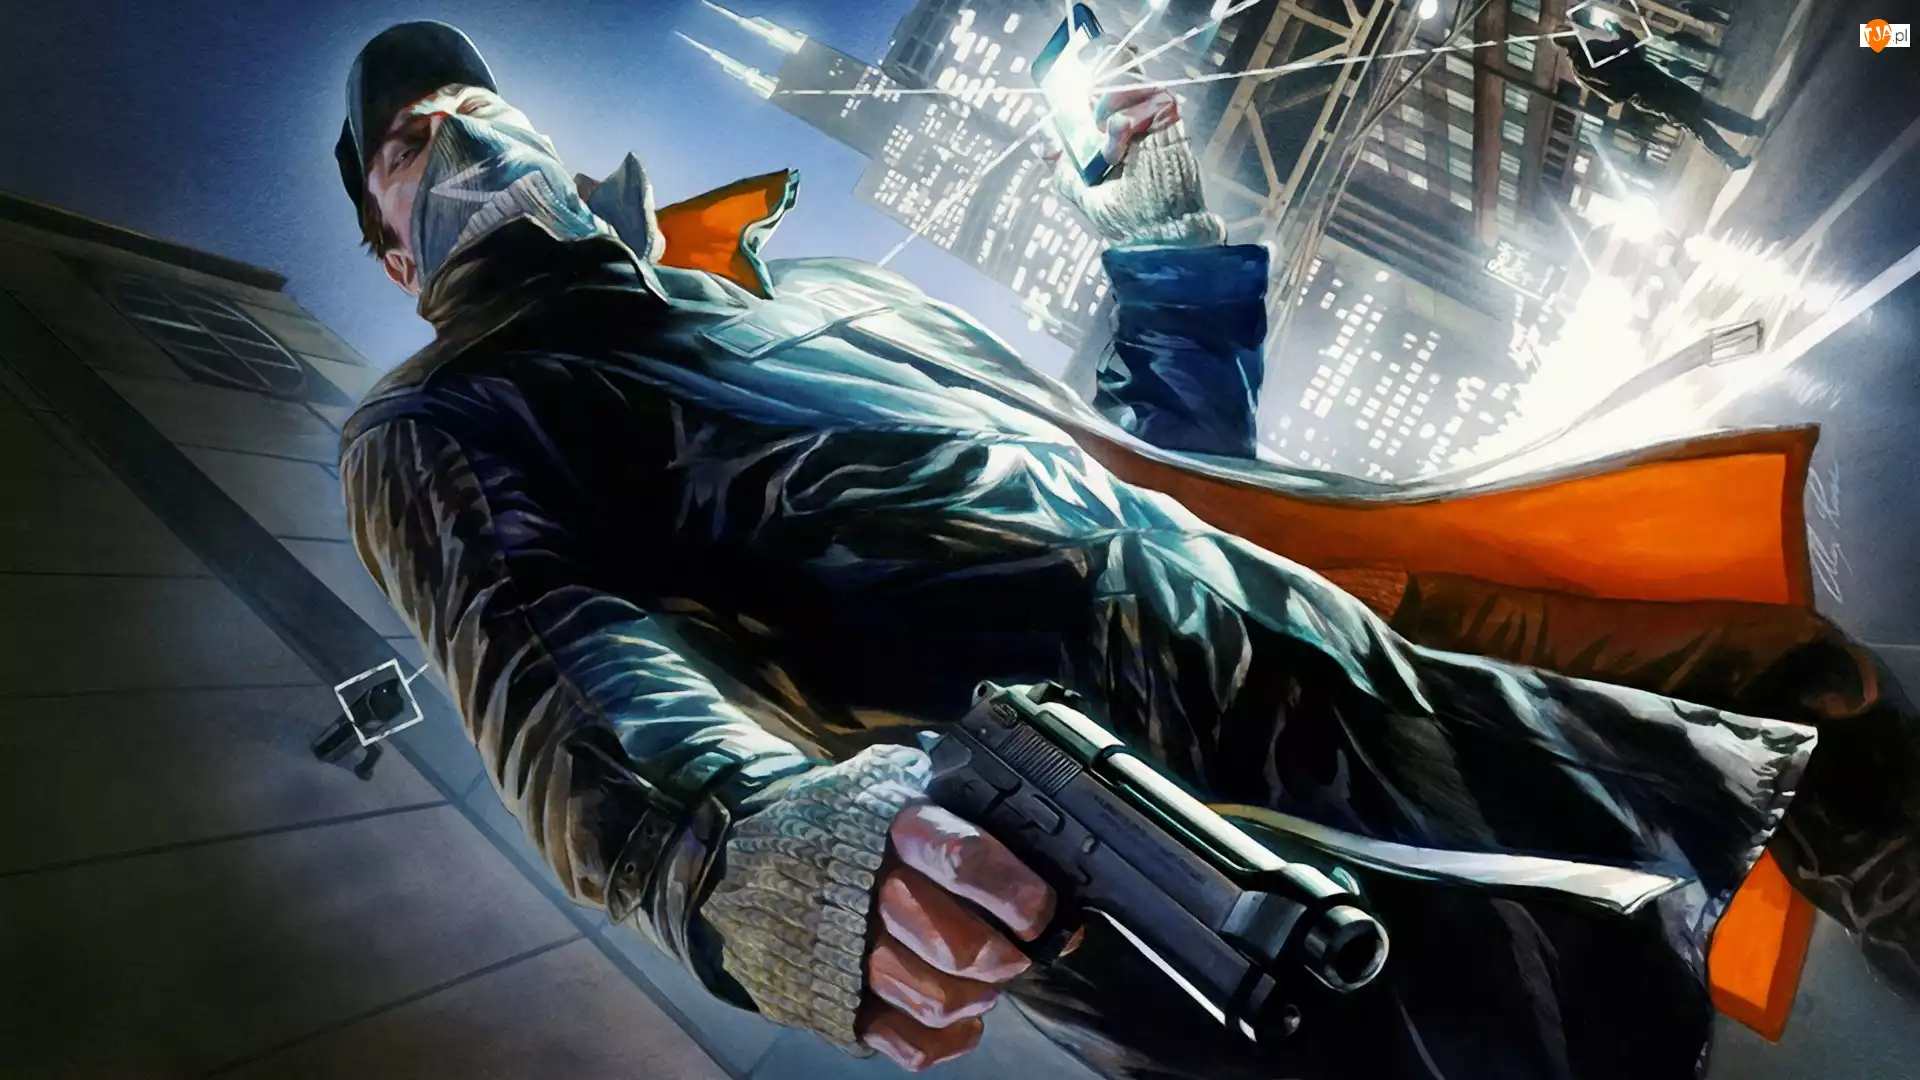 Aiden Pearce, Watch Dogs